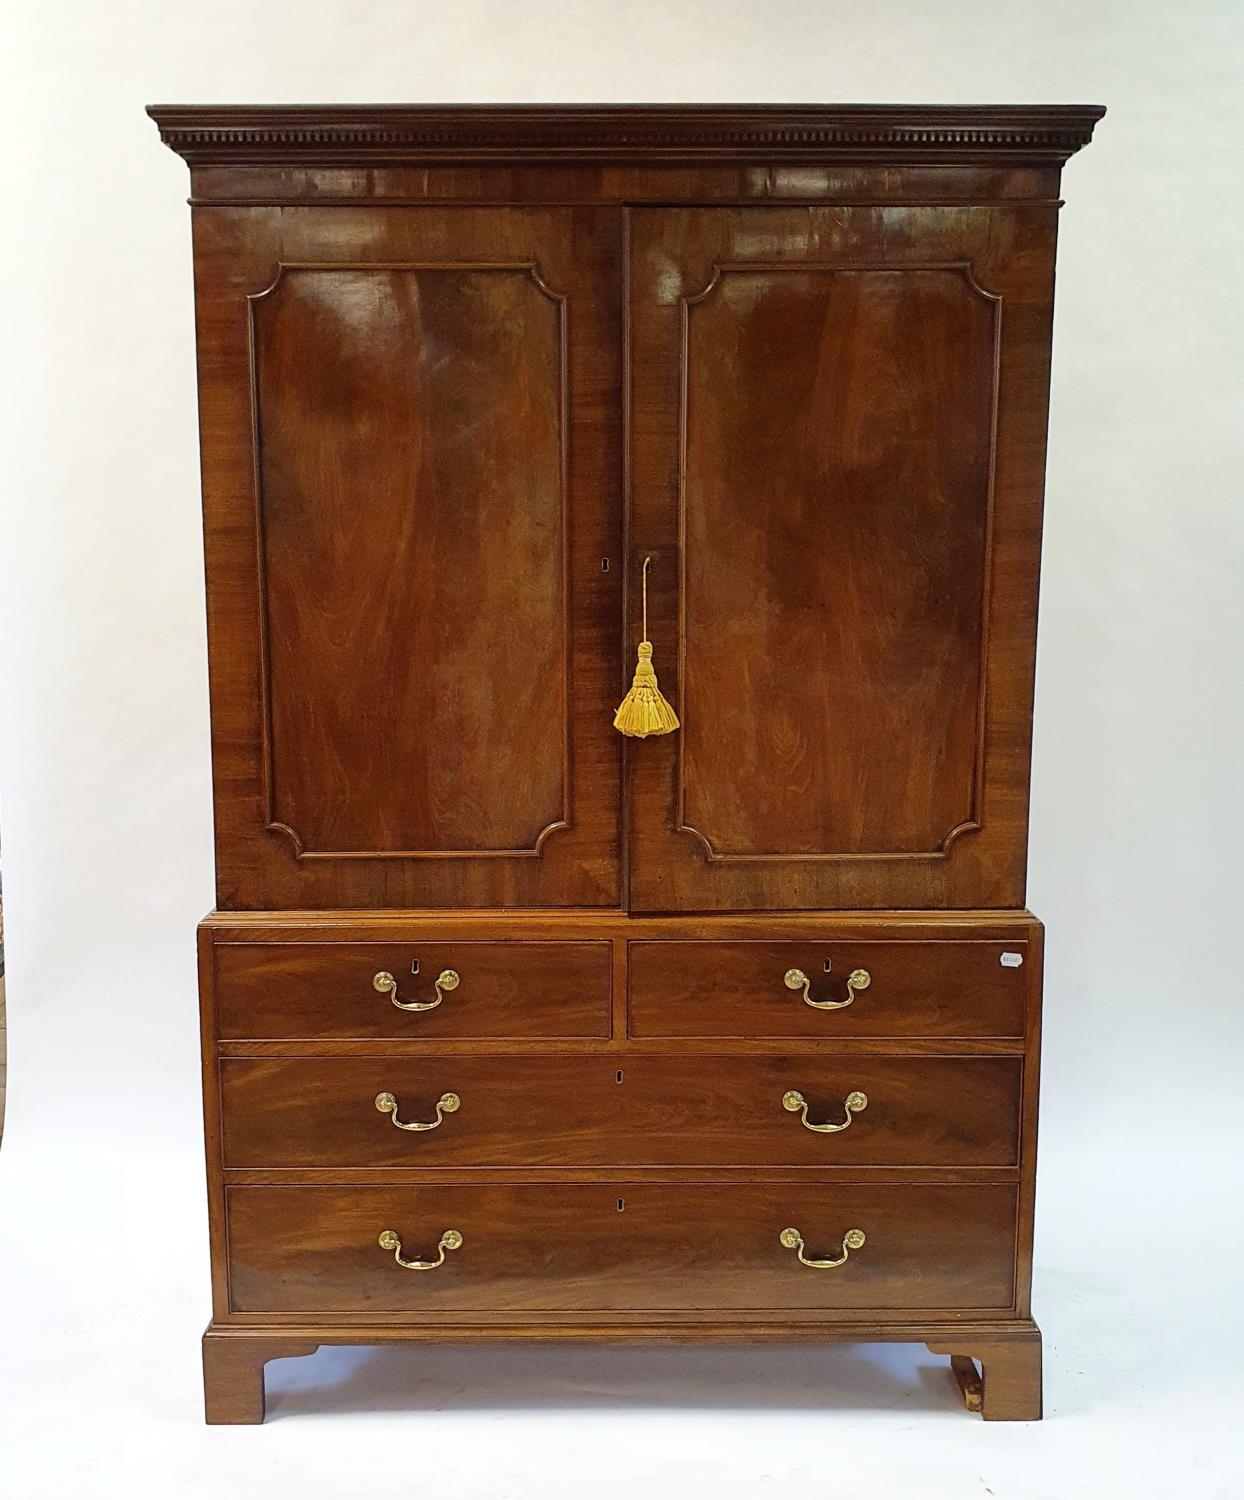 A 19th century mahogany linen press, the top with two cupboard doors, to reveal slides, on a base